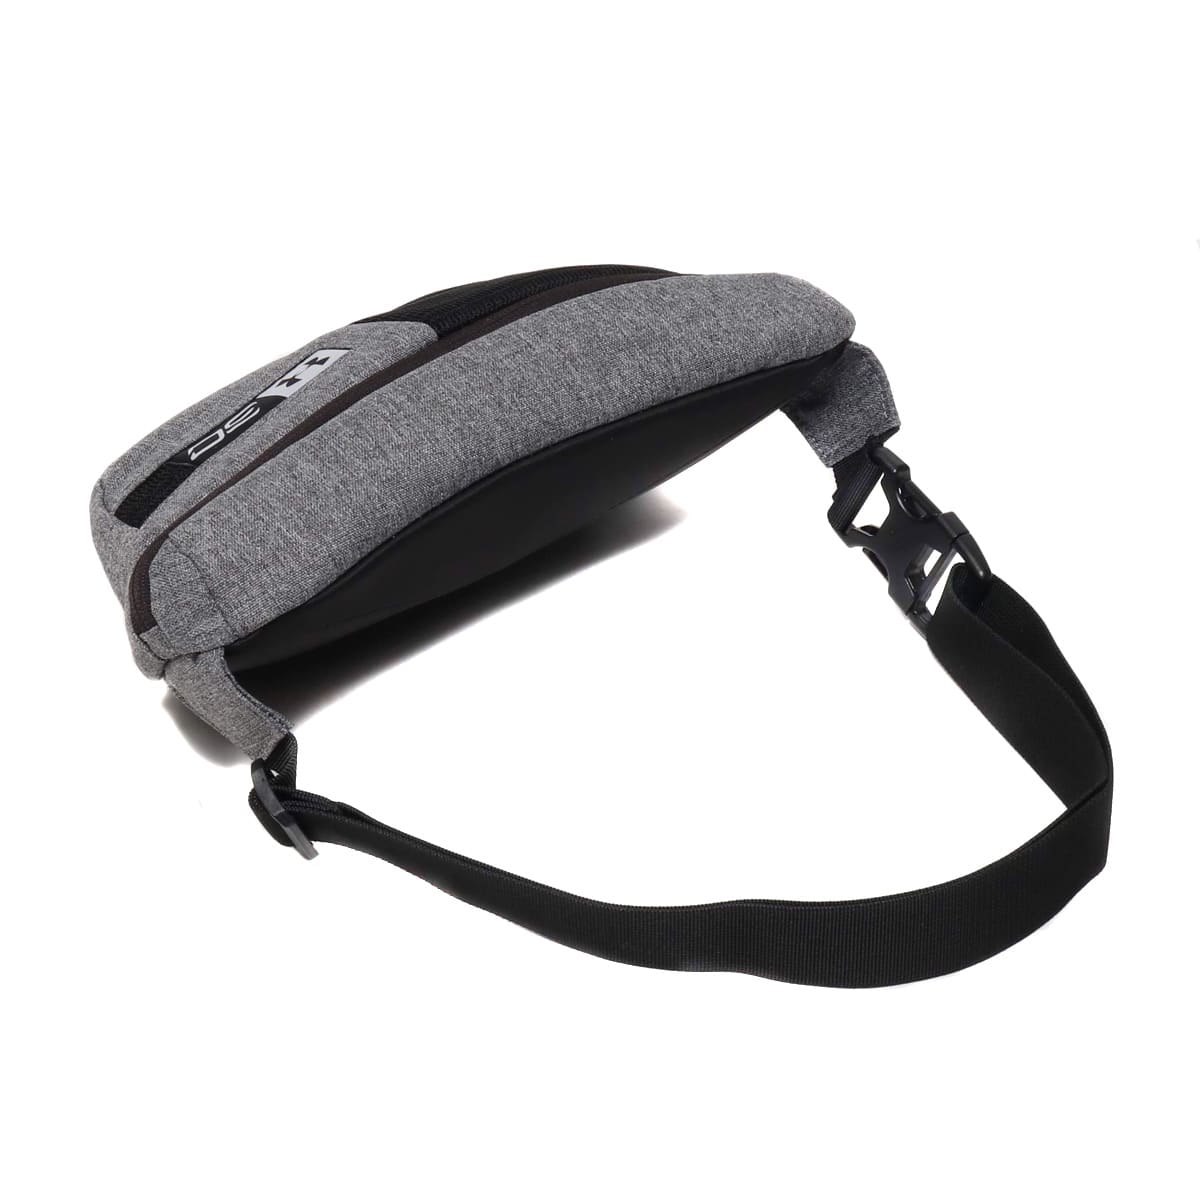 Under Armour Waist Bag : Under Armour Waist Bag - Under Armour from Excell Sports UK / Shop our 